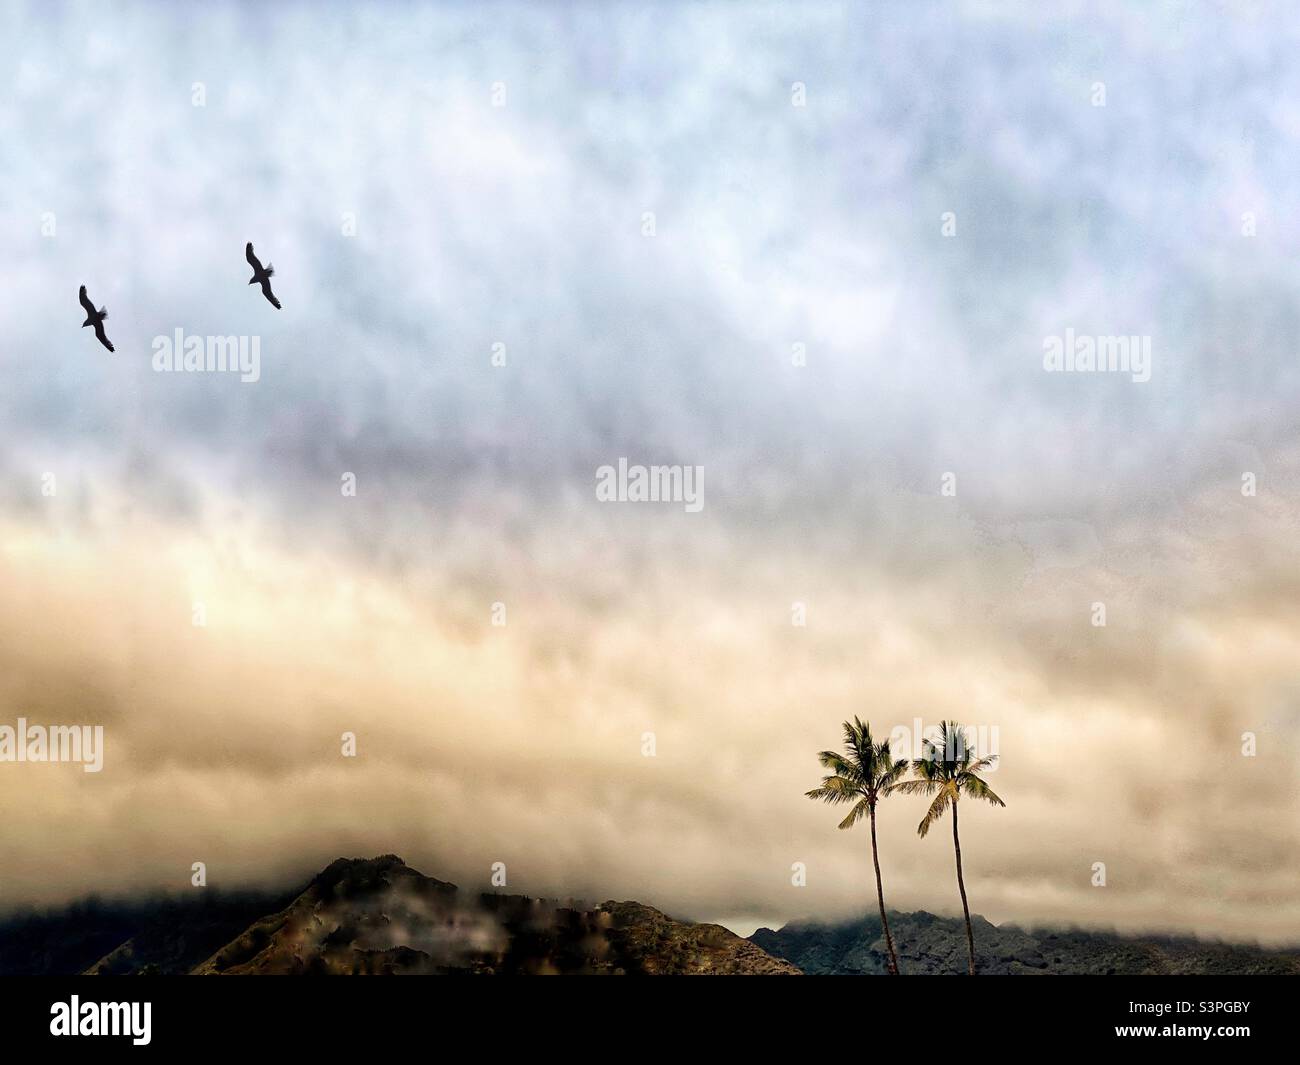 Two palm trees and two flying birds against a cloudy sky Stock Photo